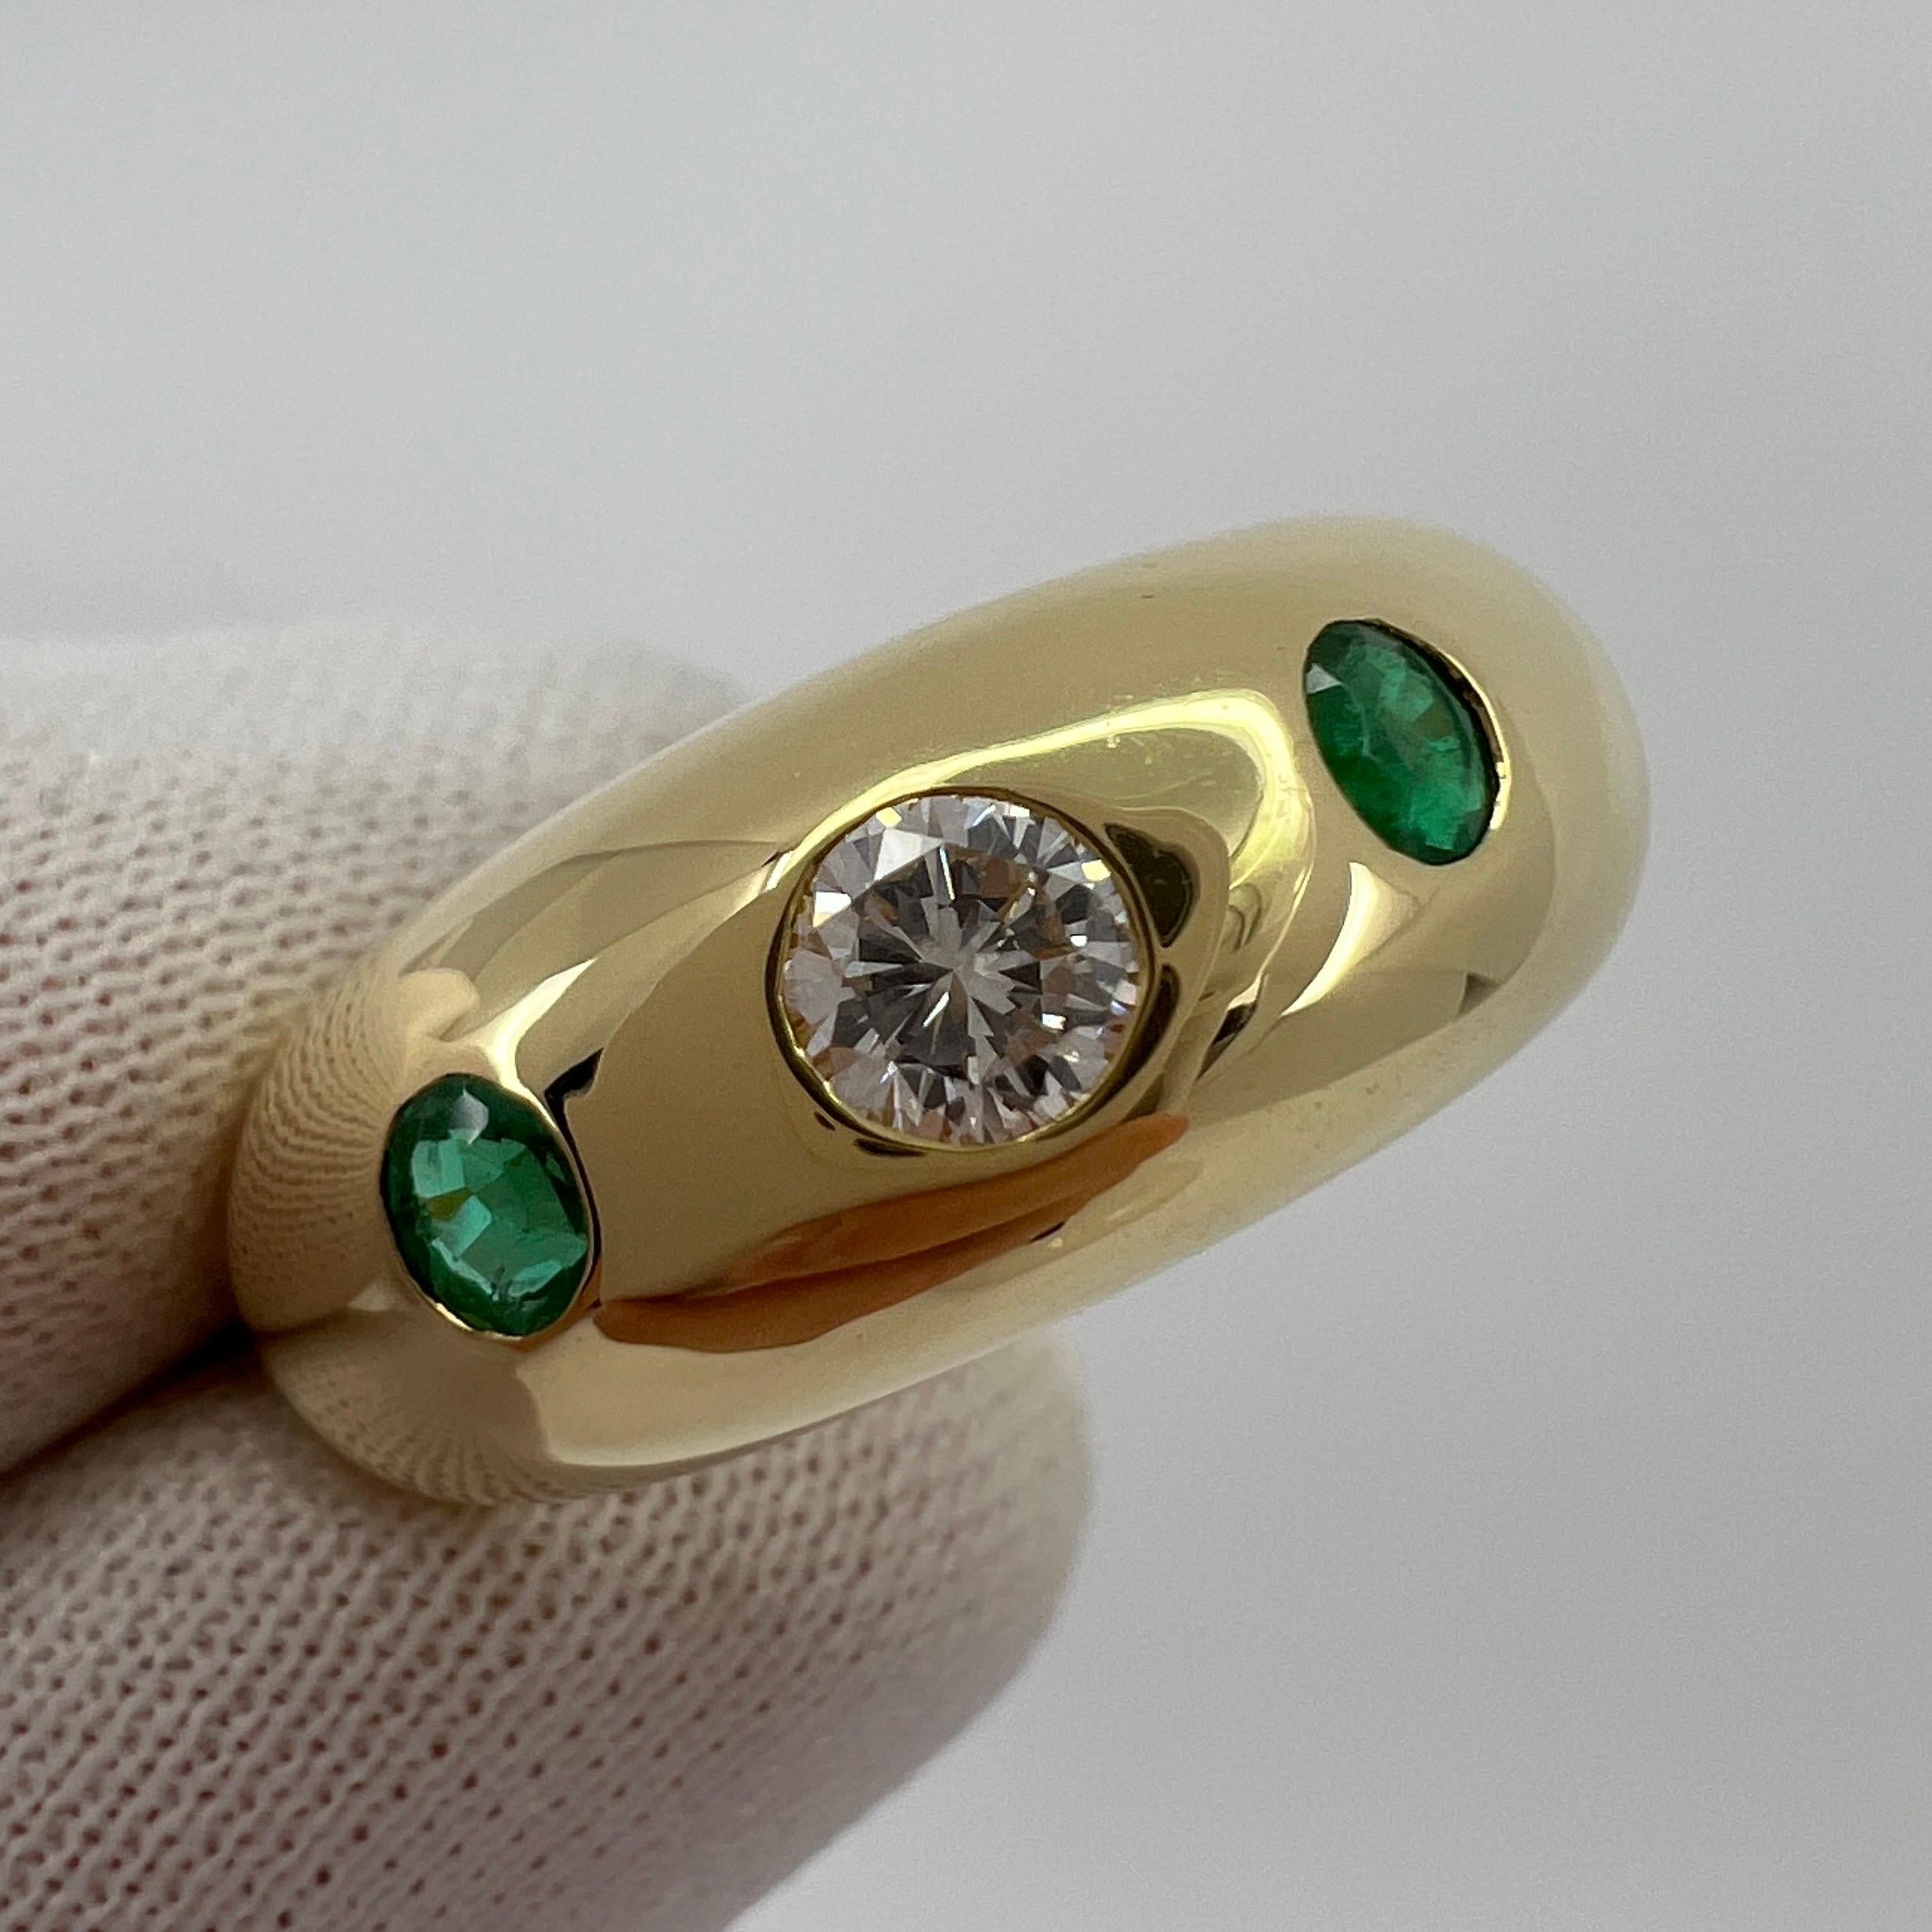 Vintage Cartier Diamond And Emerald 18k Yellow Gold Three Stone Dome Ring.

Stunning yellow gold Cartier ring set with a beautiful 3.5mm centre diamond with F/G Colour and VVS clarity. This is accented by 2 fine green emeralds approx 2.5mm